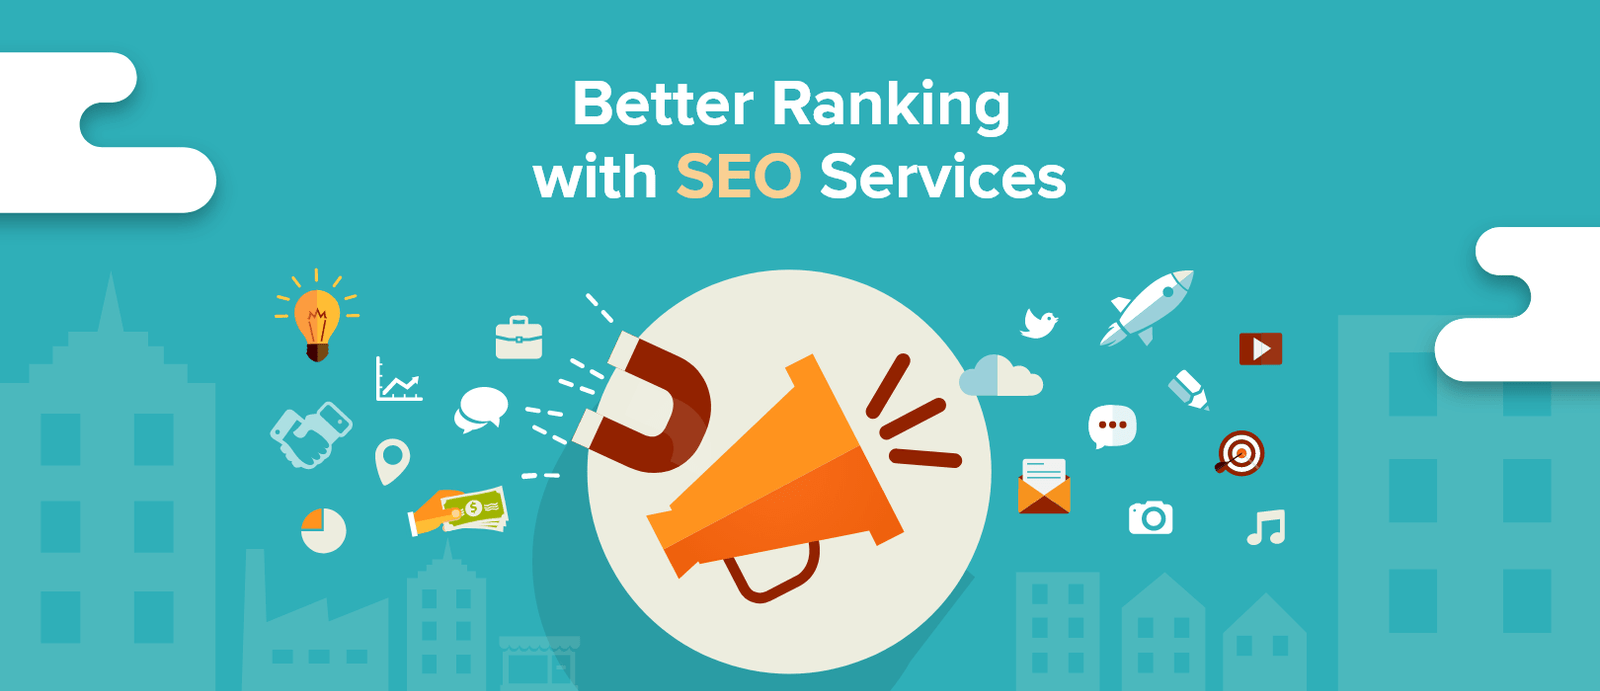 10-Unexpected-Ways-Professional-SEO-Services-Can-Give-You-Better-Ranking@2x-7dc736e5